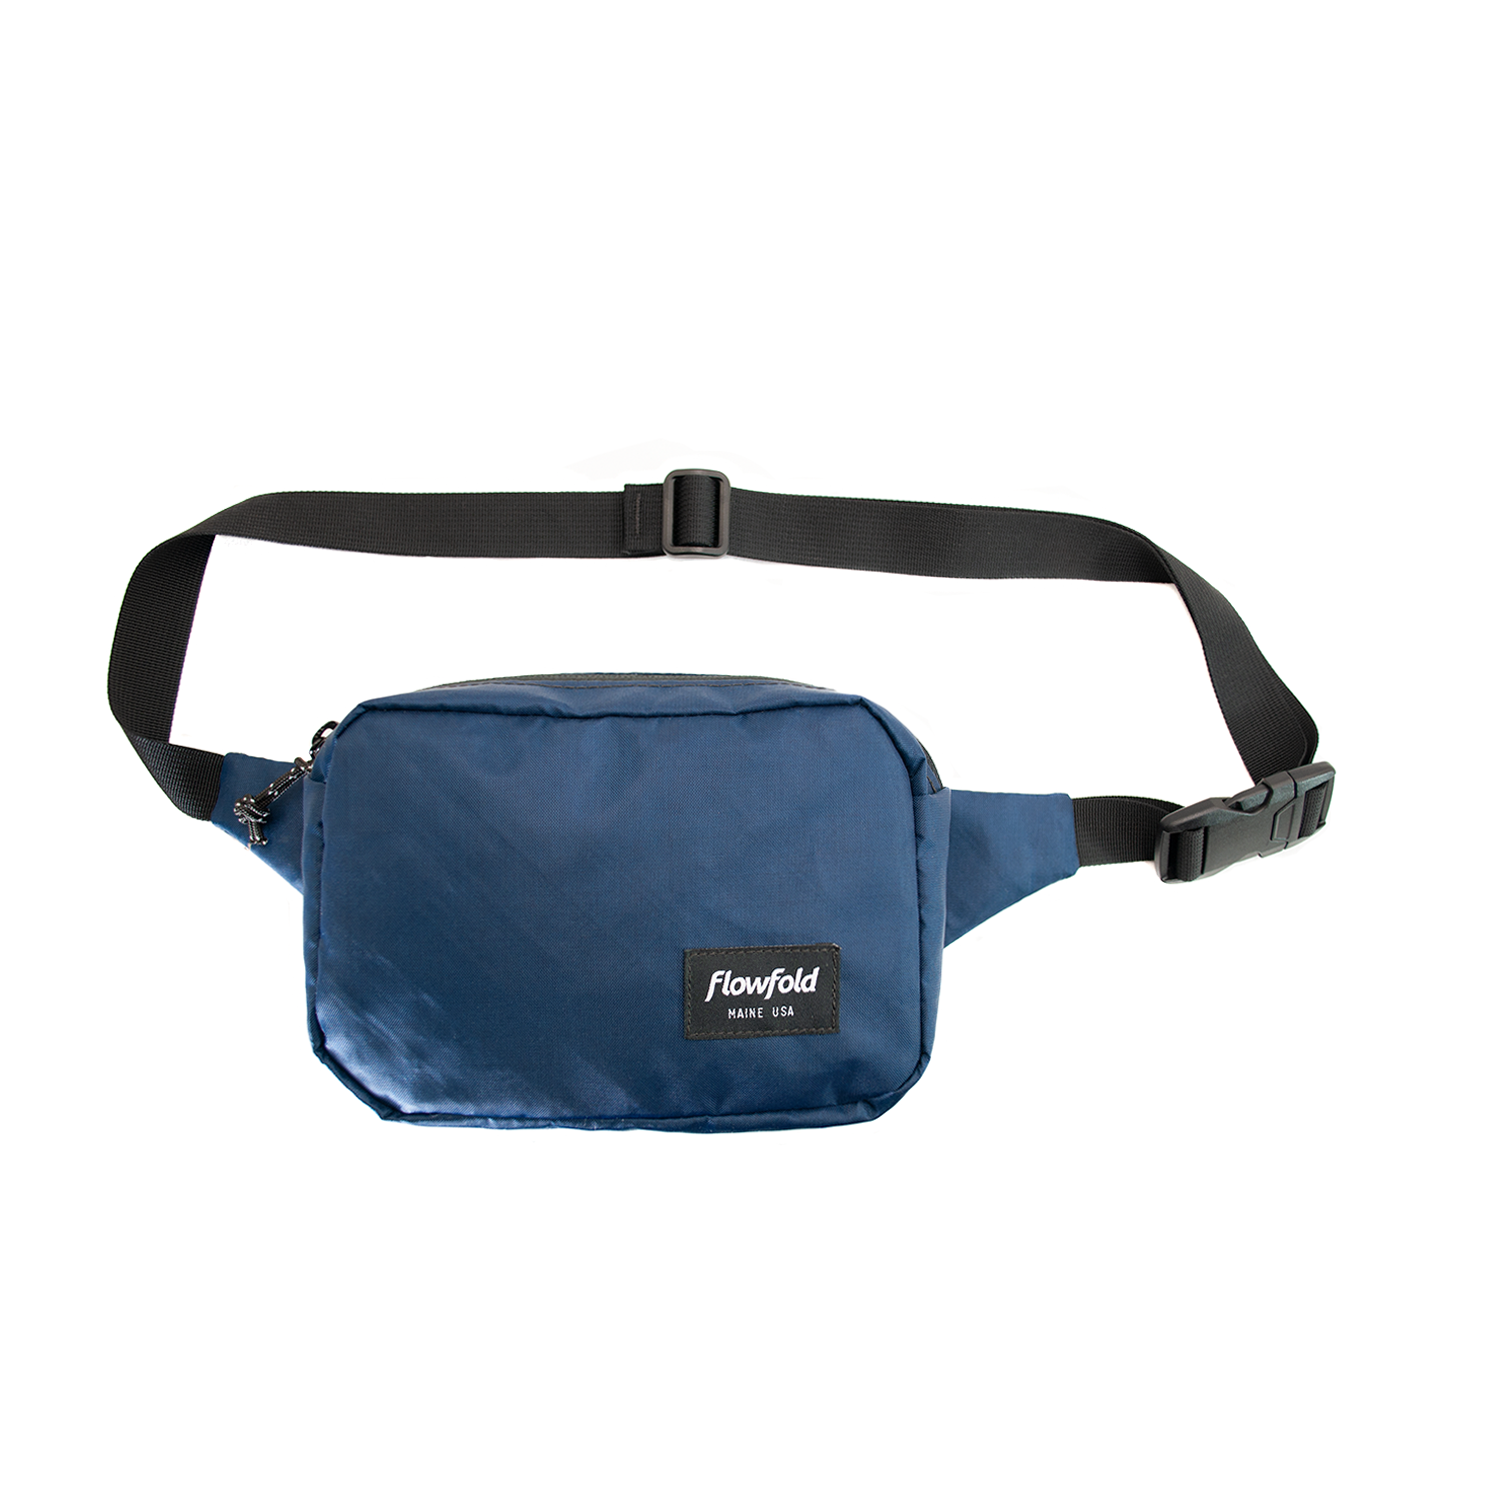 Flowfold Explorer Fanny Pack - Recycled Navy